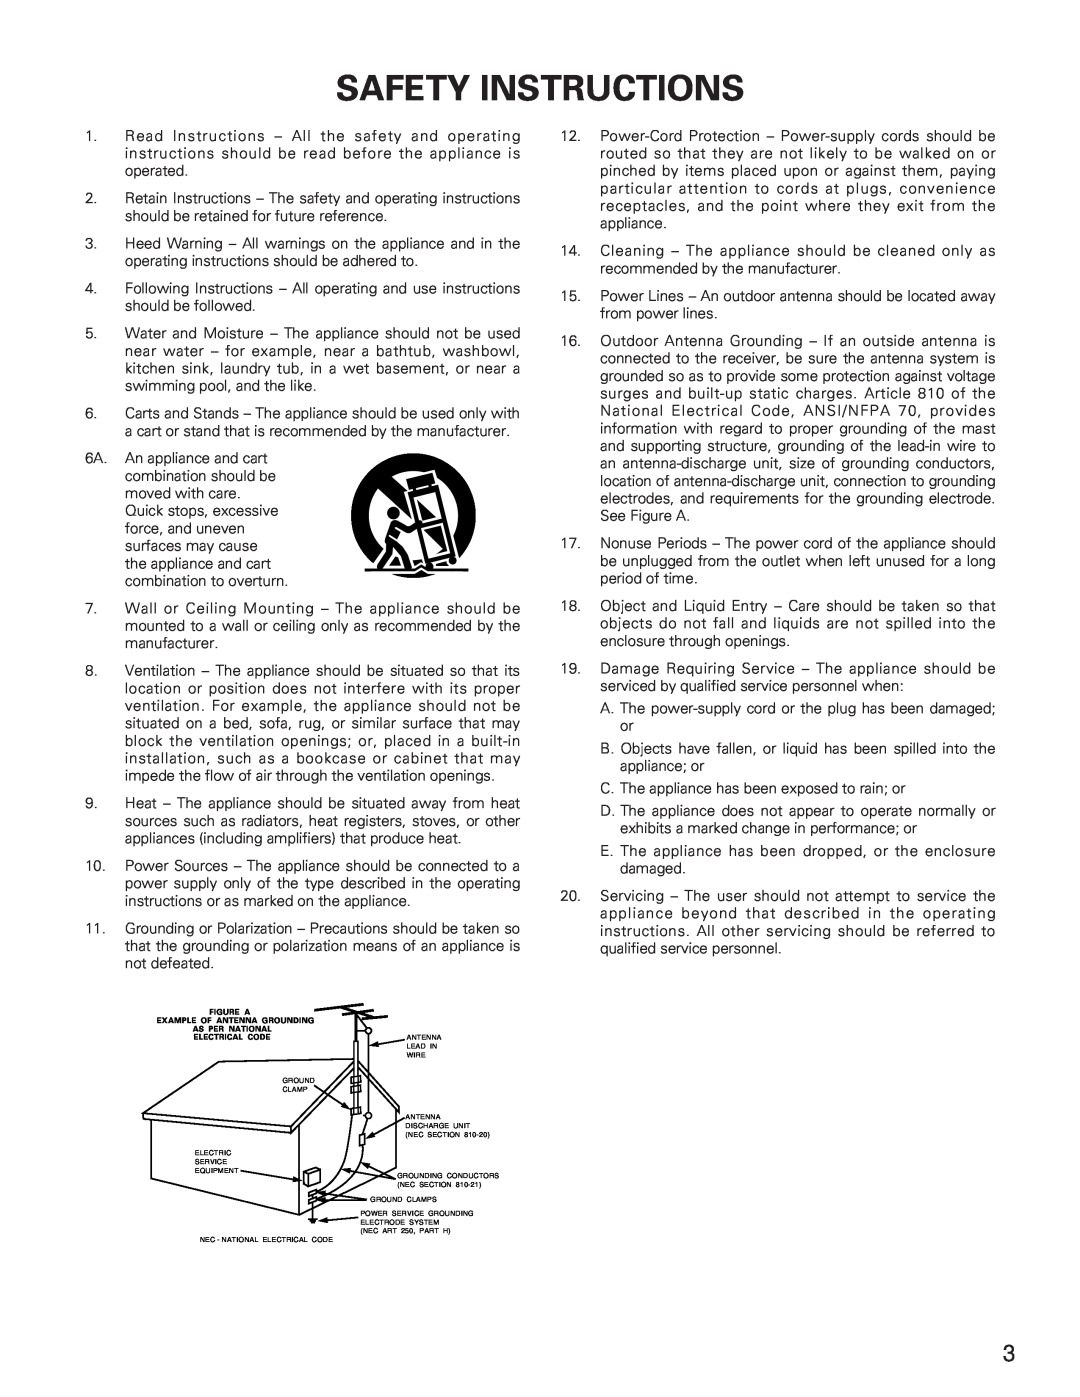 Denon DN-M991R operating instructions Safety Instructions 